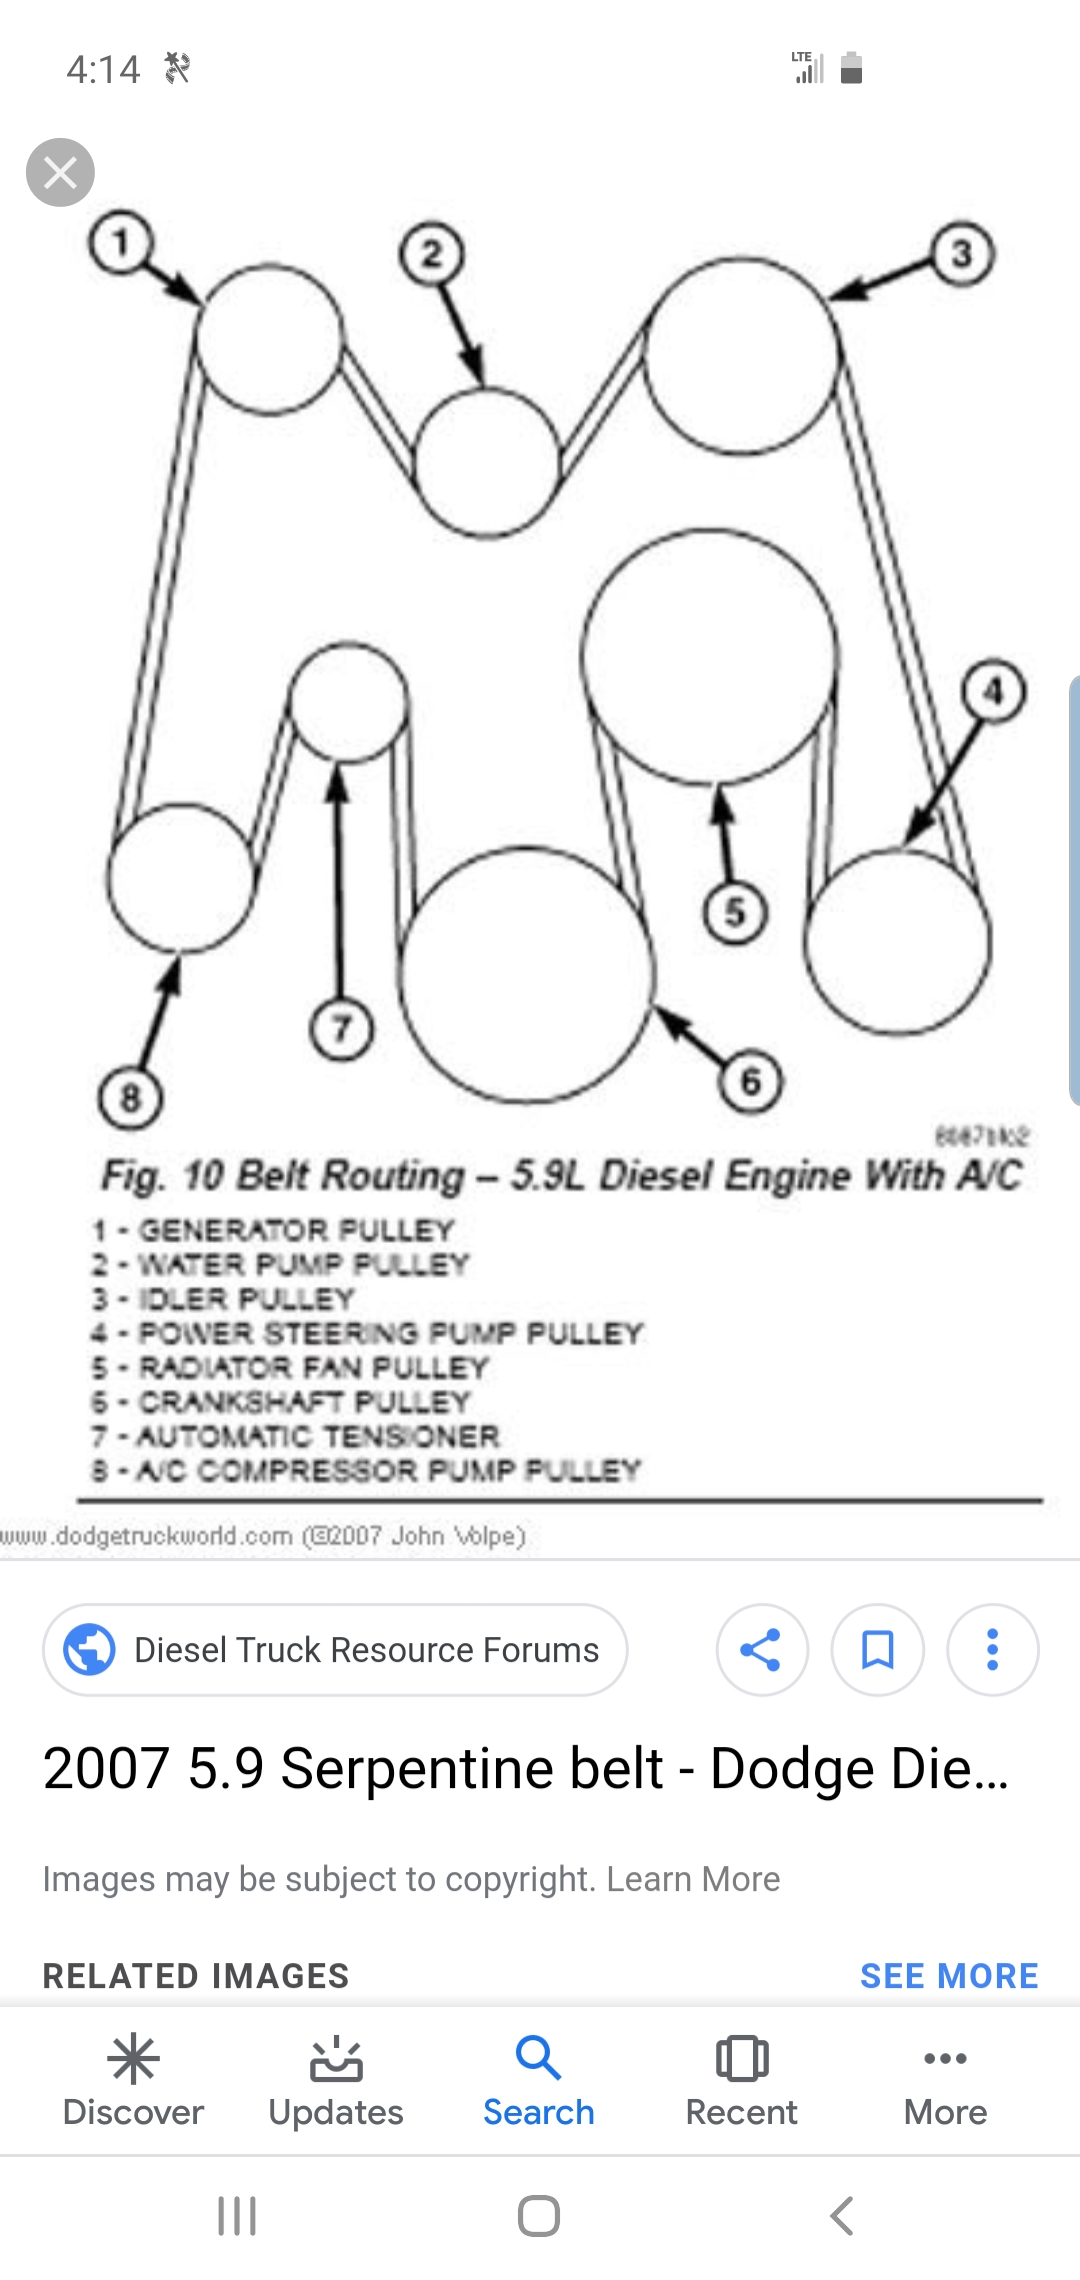 Serpentine Belt Diagrams used by Fast T's On Site Automotive Technicians.